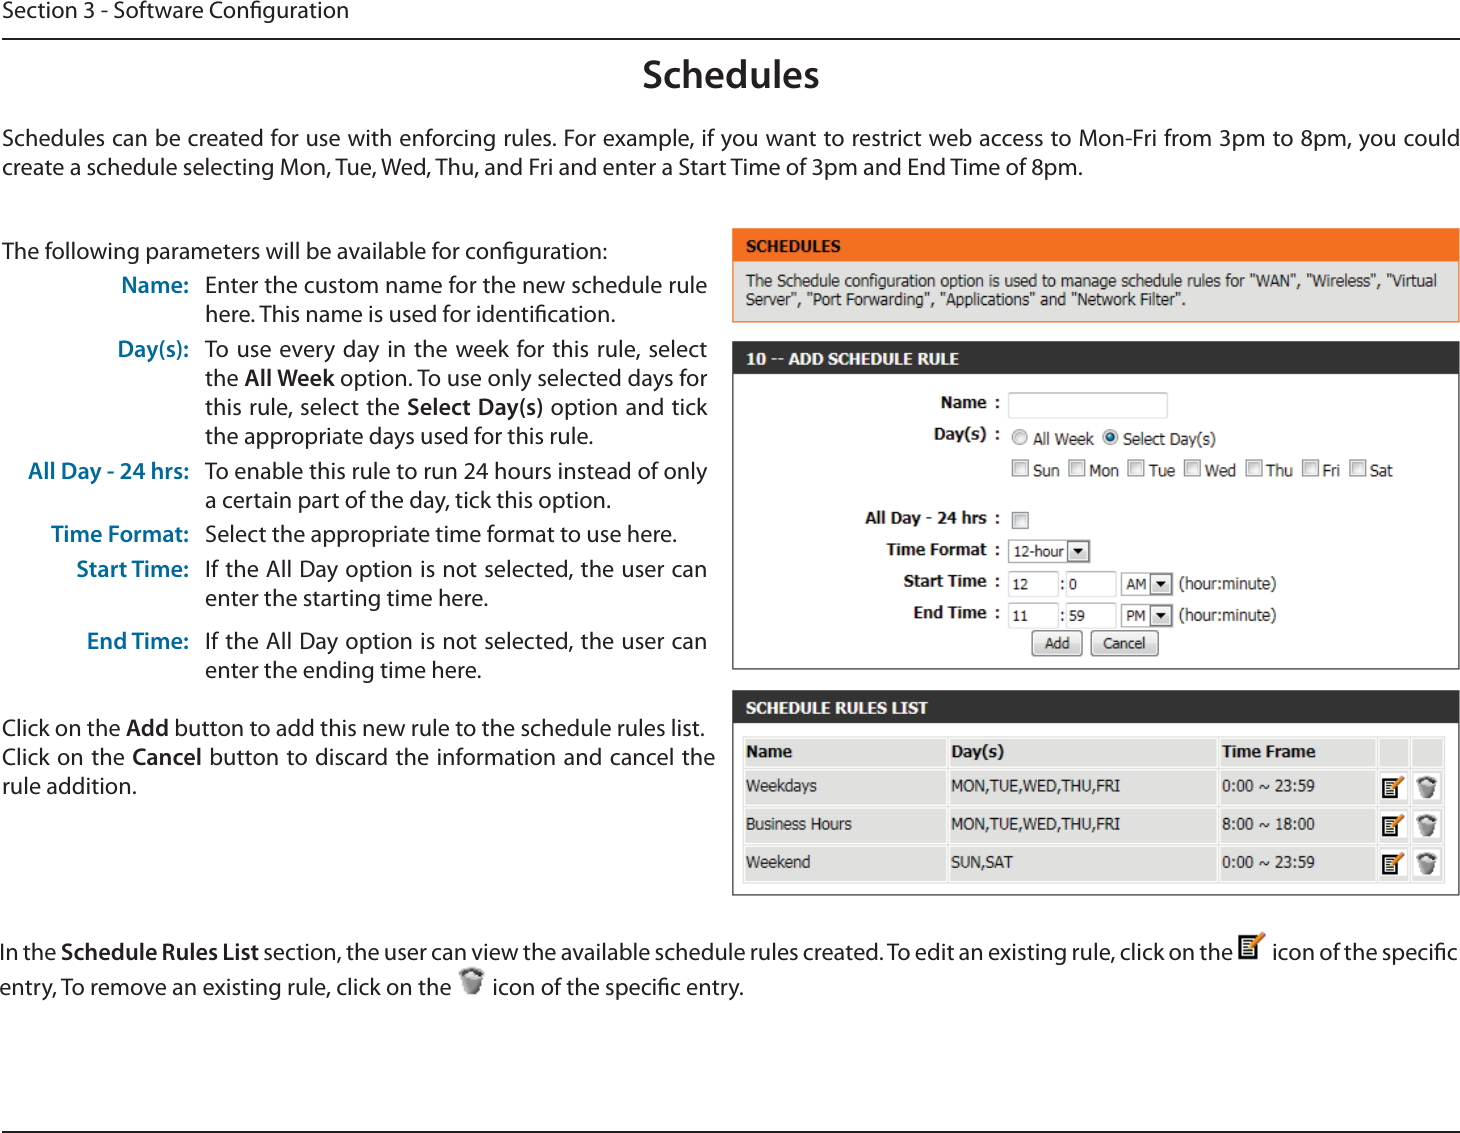 Section 3 - Software CongurationSchedulesThe following parameters will be available for conguration:Name: Enter the custom name for the new schedule rule here. This name is used for identication.Day(s): To use every day in the week for this rule, select the All Week option. To use only selected days for this rule, select the Select Day(s) option and tick the appropriate days used for this rule.All Day - 24 hrs: To enable this rule to run 24 hours instead of only a certain part of the day, tick this option.Time Format: Select the appropriate time format to use here.Start Time: If the All Day option is not selected, the user can enter the starting time here.End Time: If the All Day option is not selected, the user can enter the ending time here.Click on the Add button to add this new rule to the schedule rules list.Click on the Cancel button to discard the information and cancel the rule addition.In the Schedule Rules List section, the user can view the available schedule rules created. To edit an existing rule, click on the   icon of the specic entry, To remove an existing rule, click on the   icon of the specic entry.Schedules can be created for use with enforcing rules. For example, if you want to restrict web access to Mon-Fri from 3pm to 8pm, you could create a schedule selecting Mon, Tue, Wed, Thu, and Fri and enter a Start Time of 3pm and End Time of 8pm.